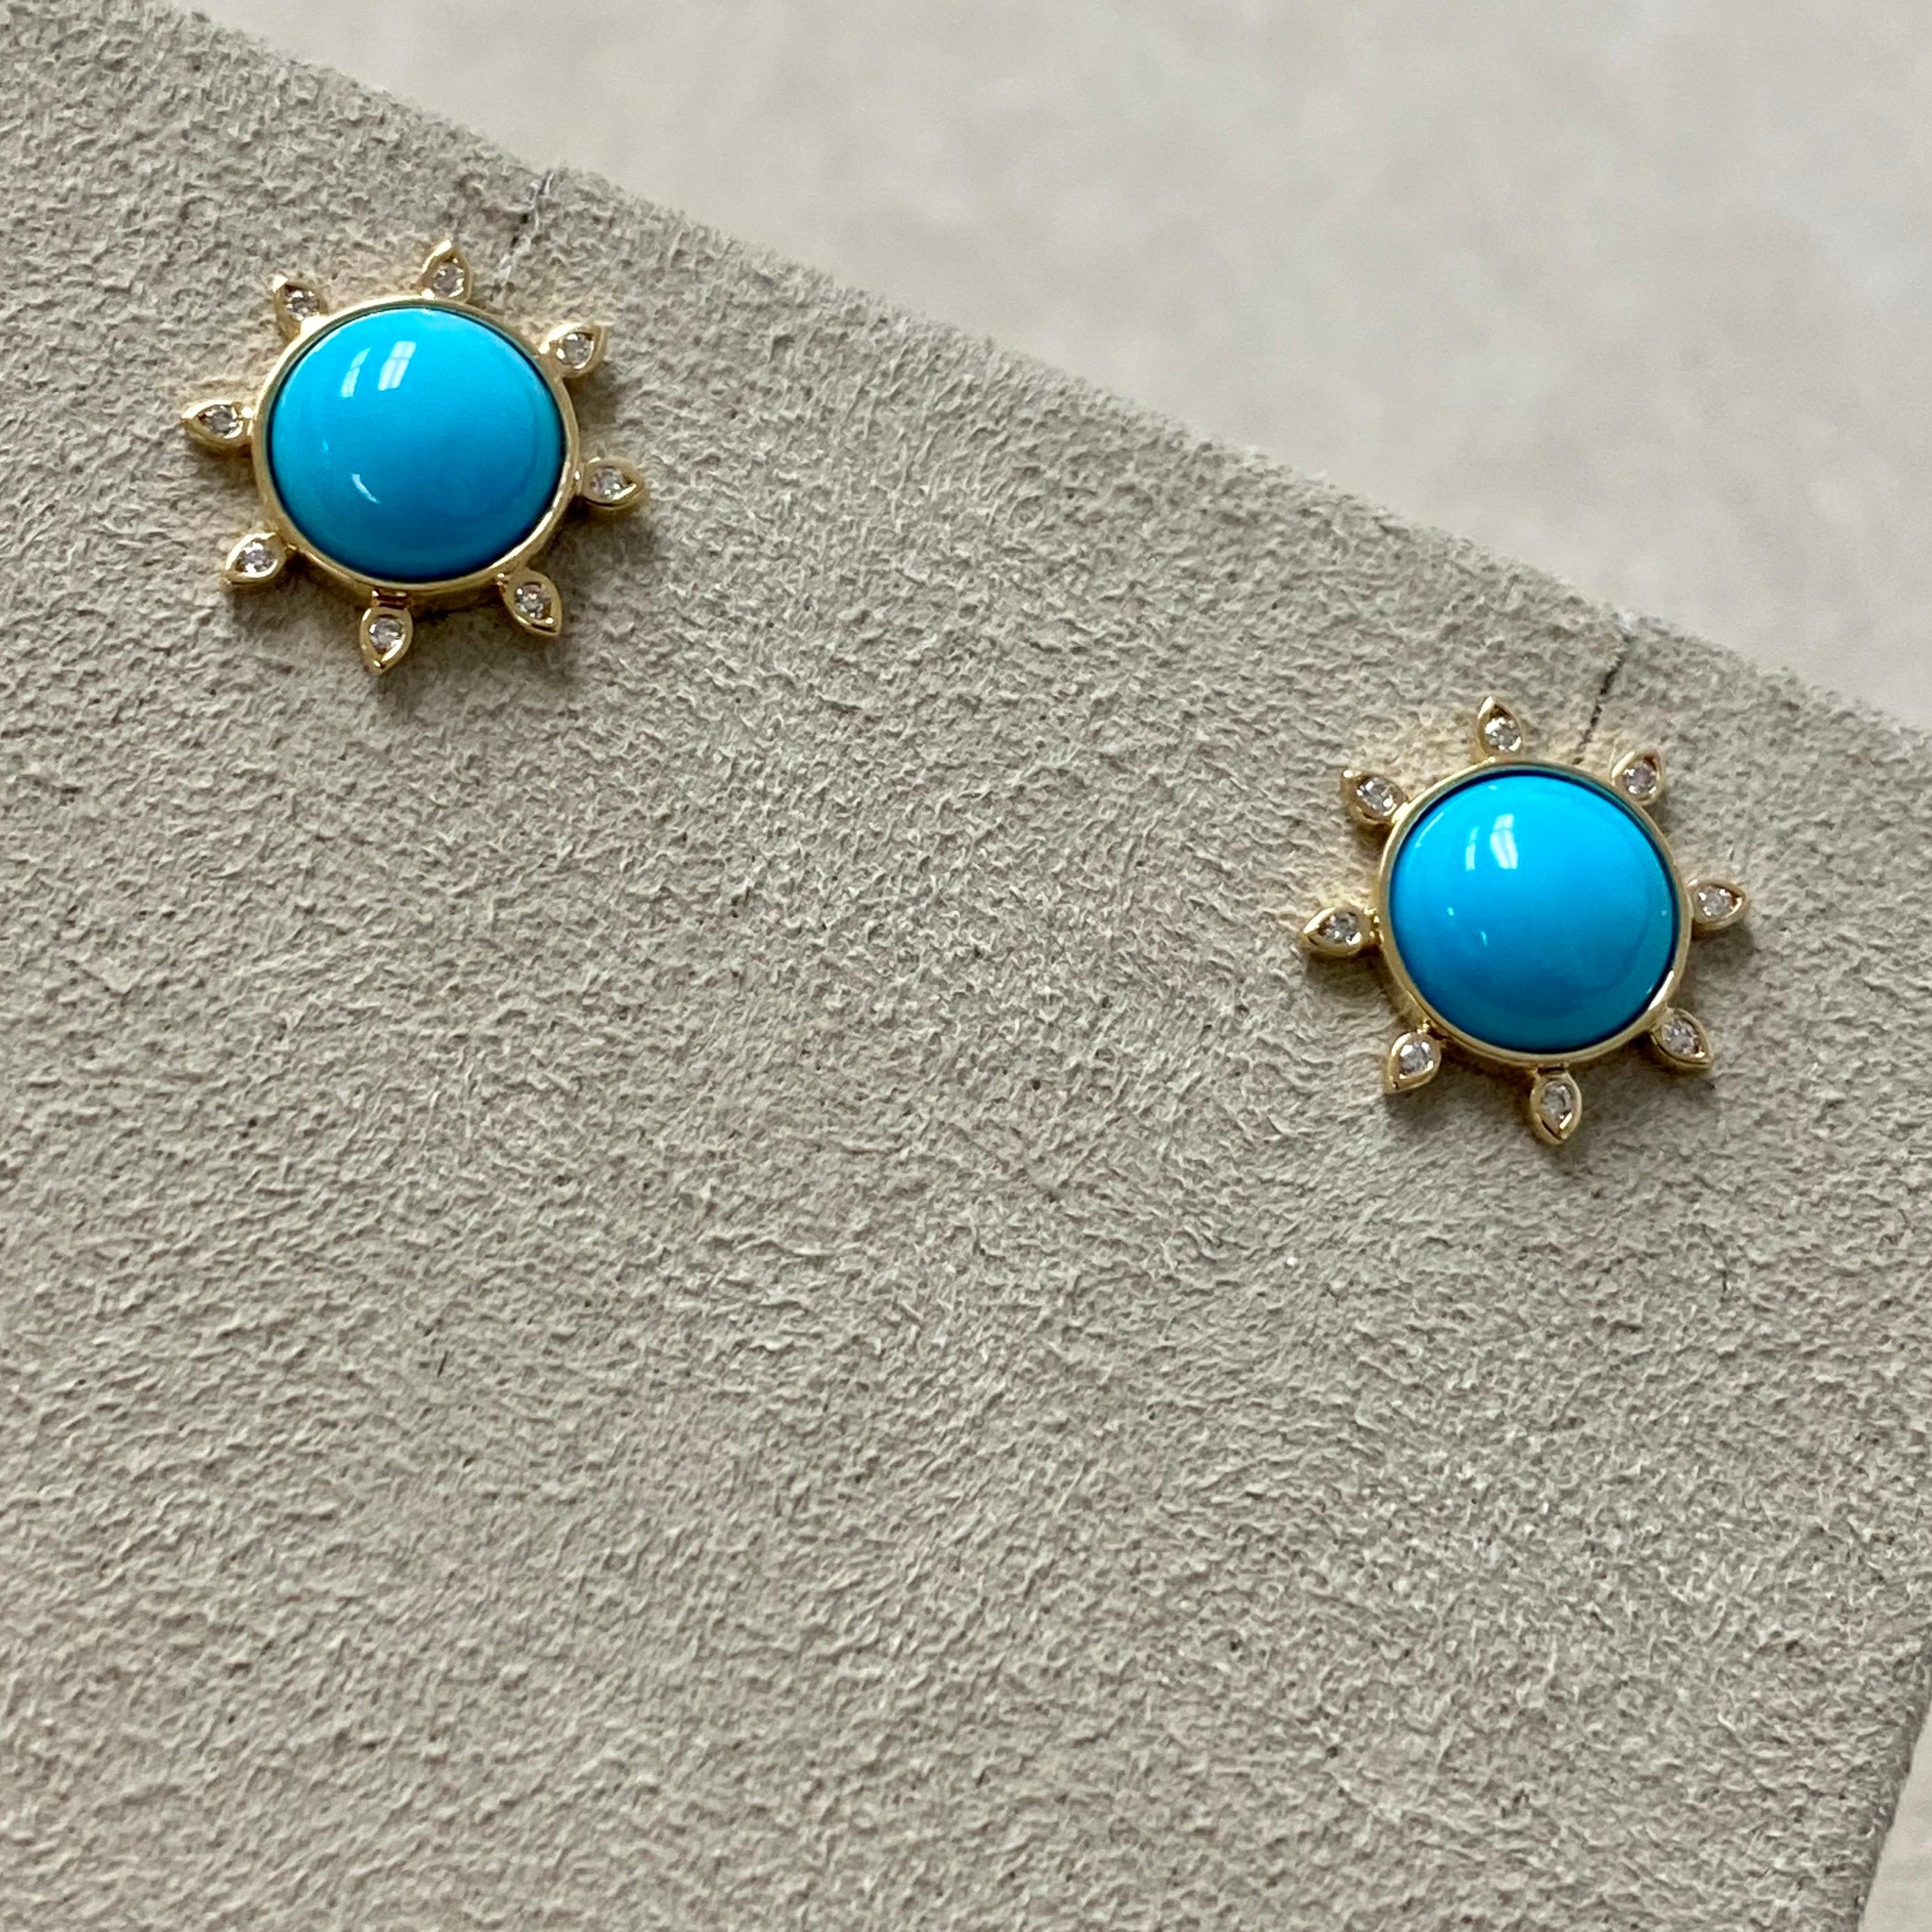 Created in 18 karat yellow gold
Sleeping Beauty Turquoise cabochons 4 cts approx
Diamonds 0.10 ct approx
Limited edition

These handcrafted, limited edition Candy Blue Topaz and Moon Quartz Earrings are the epitome of luxury. Crafted from the finest